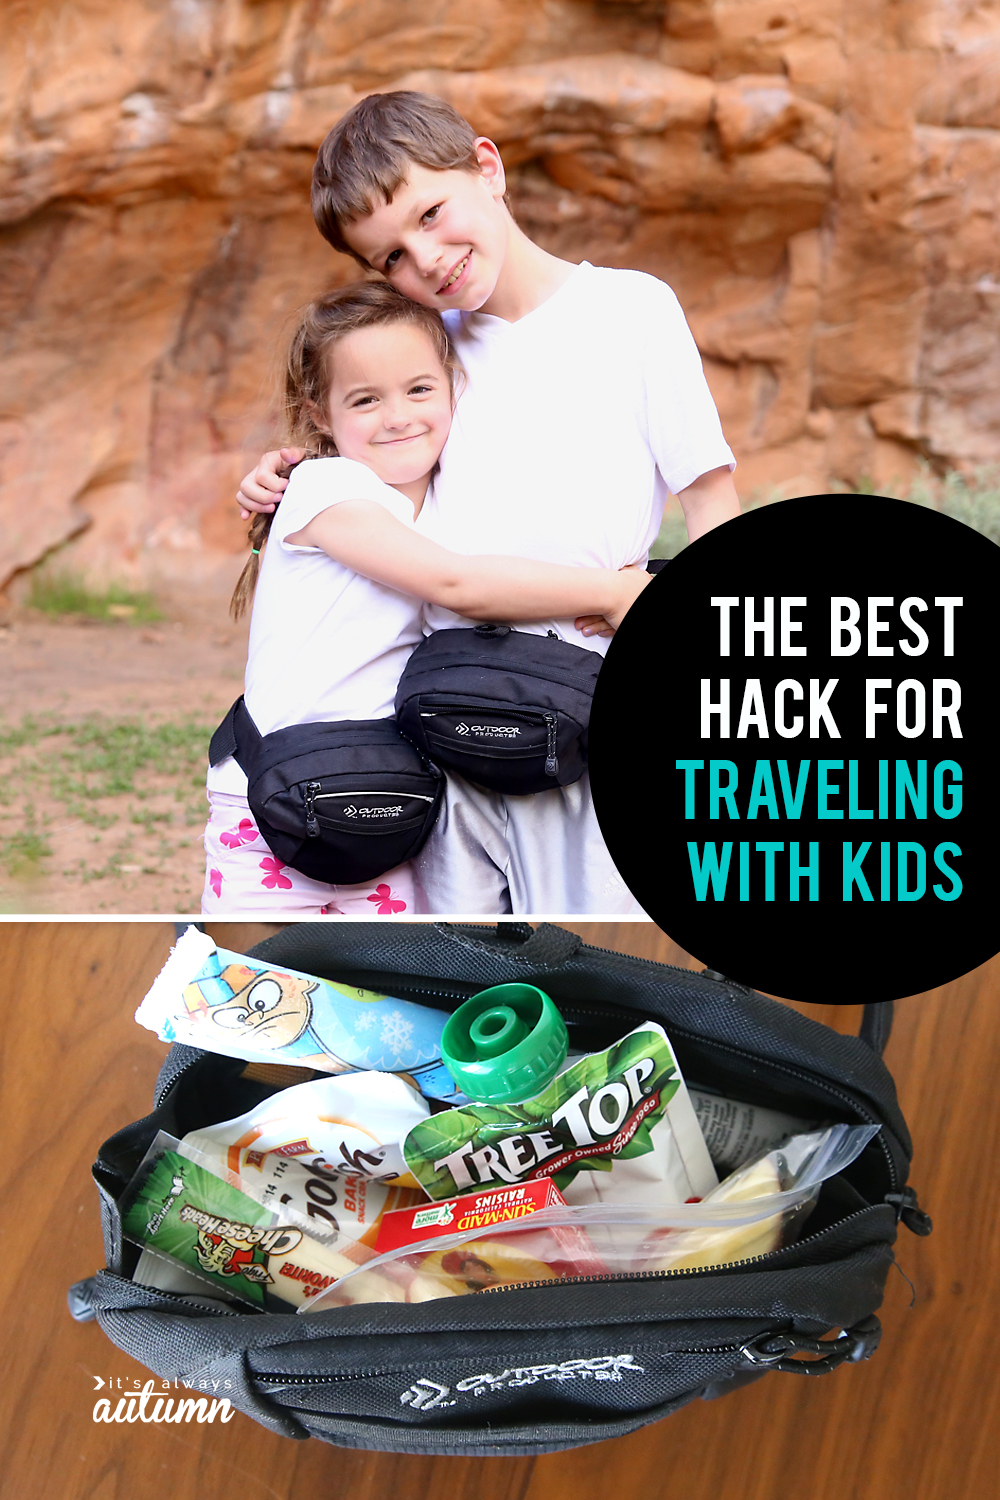 A boy and girl wearing fanny packs; a fanny pack full of healthy snacks